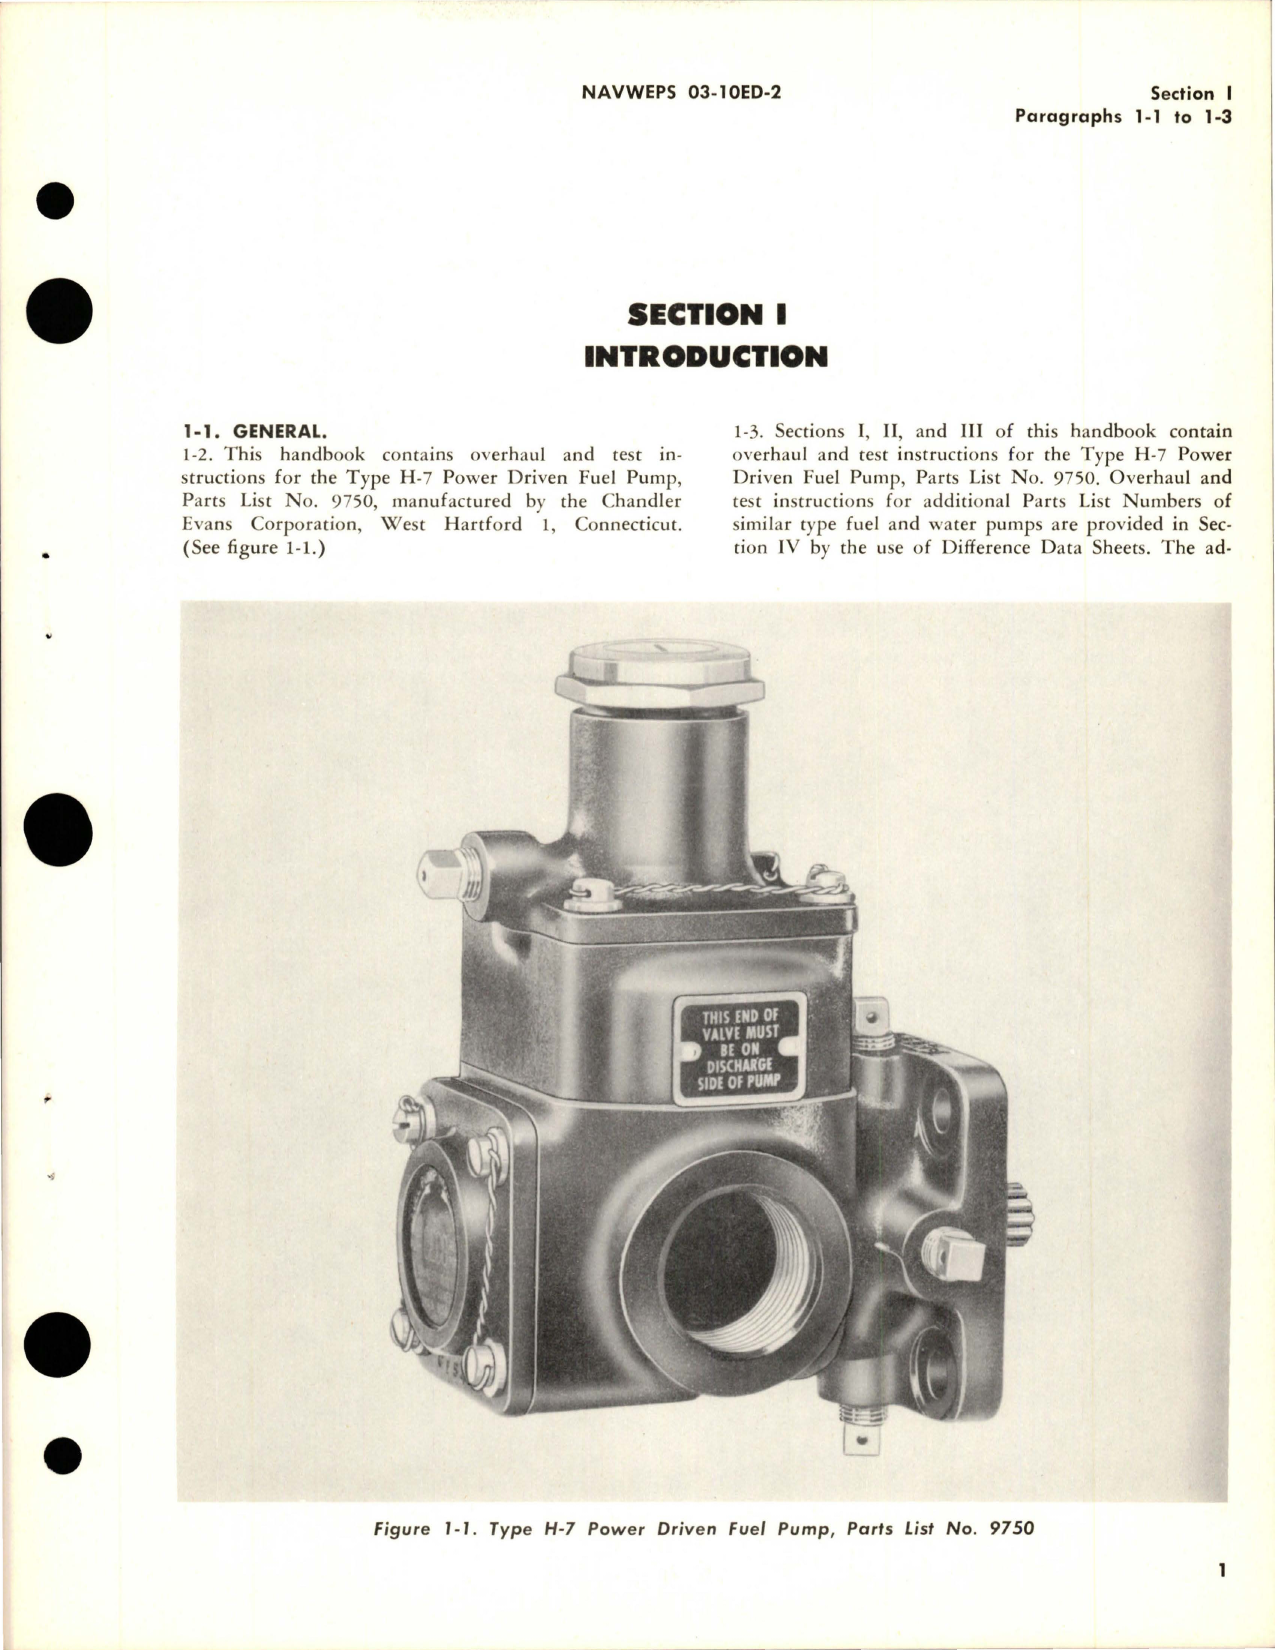 Sample page 5 from AirCorps Library document: Overhaul Instructions for Fuel and Water Pumps - Types F-10, H-2, H-4, and H-7